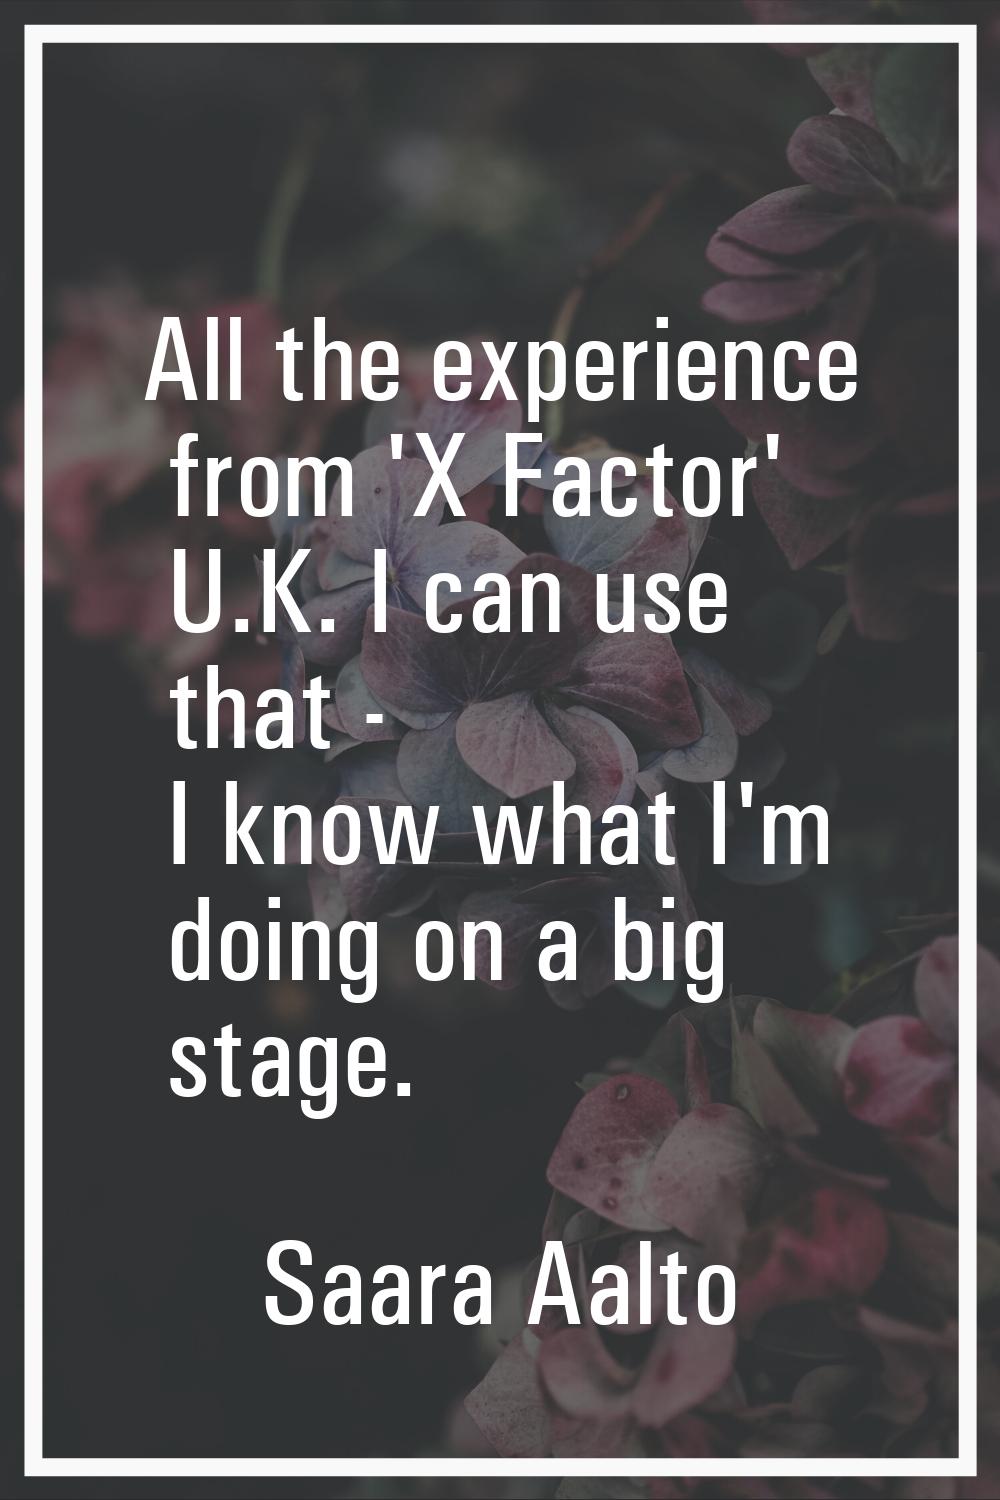 All the experience from 'X Factor' U.K. I can use that - I know what I'm doing on a big stage.